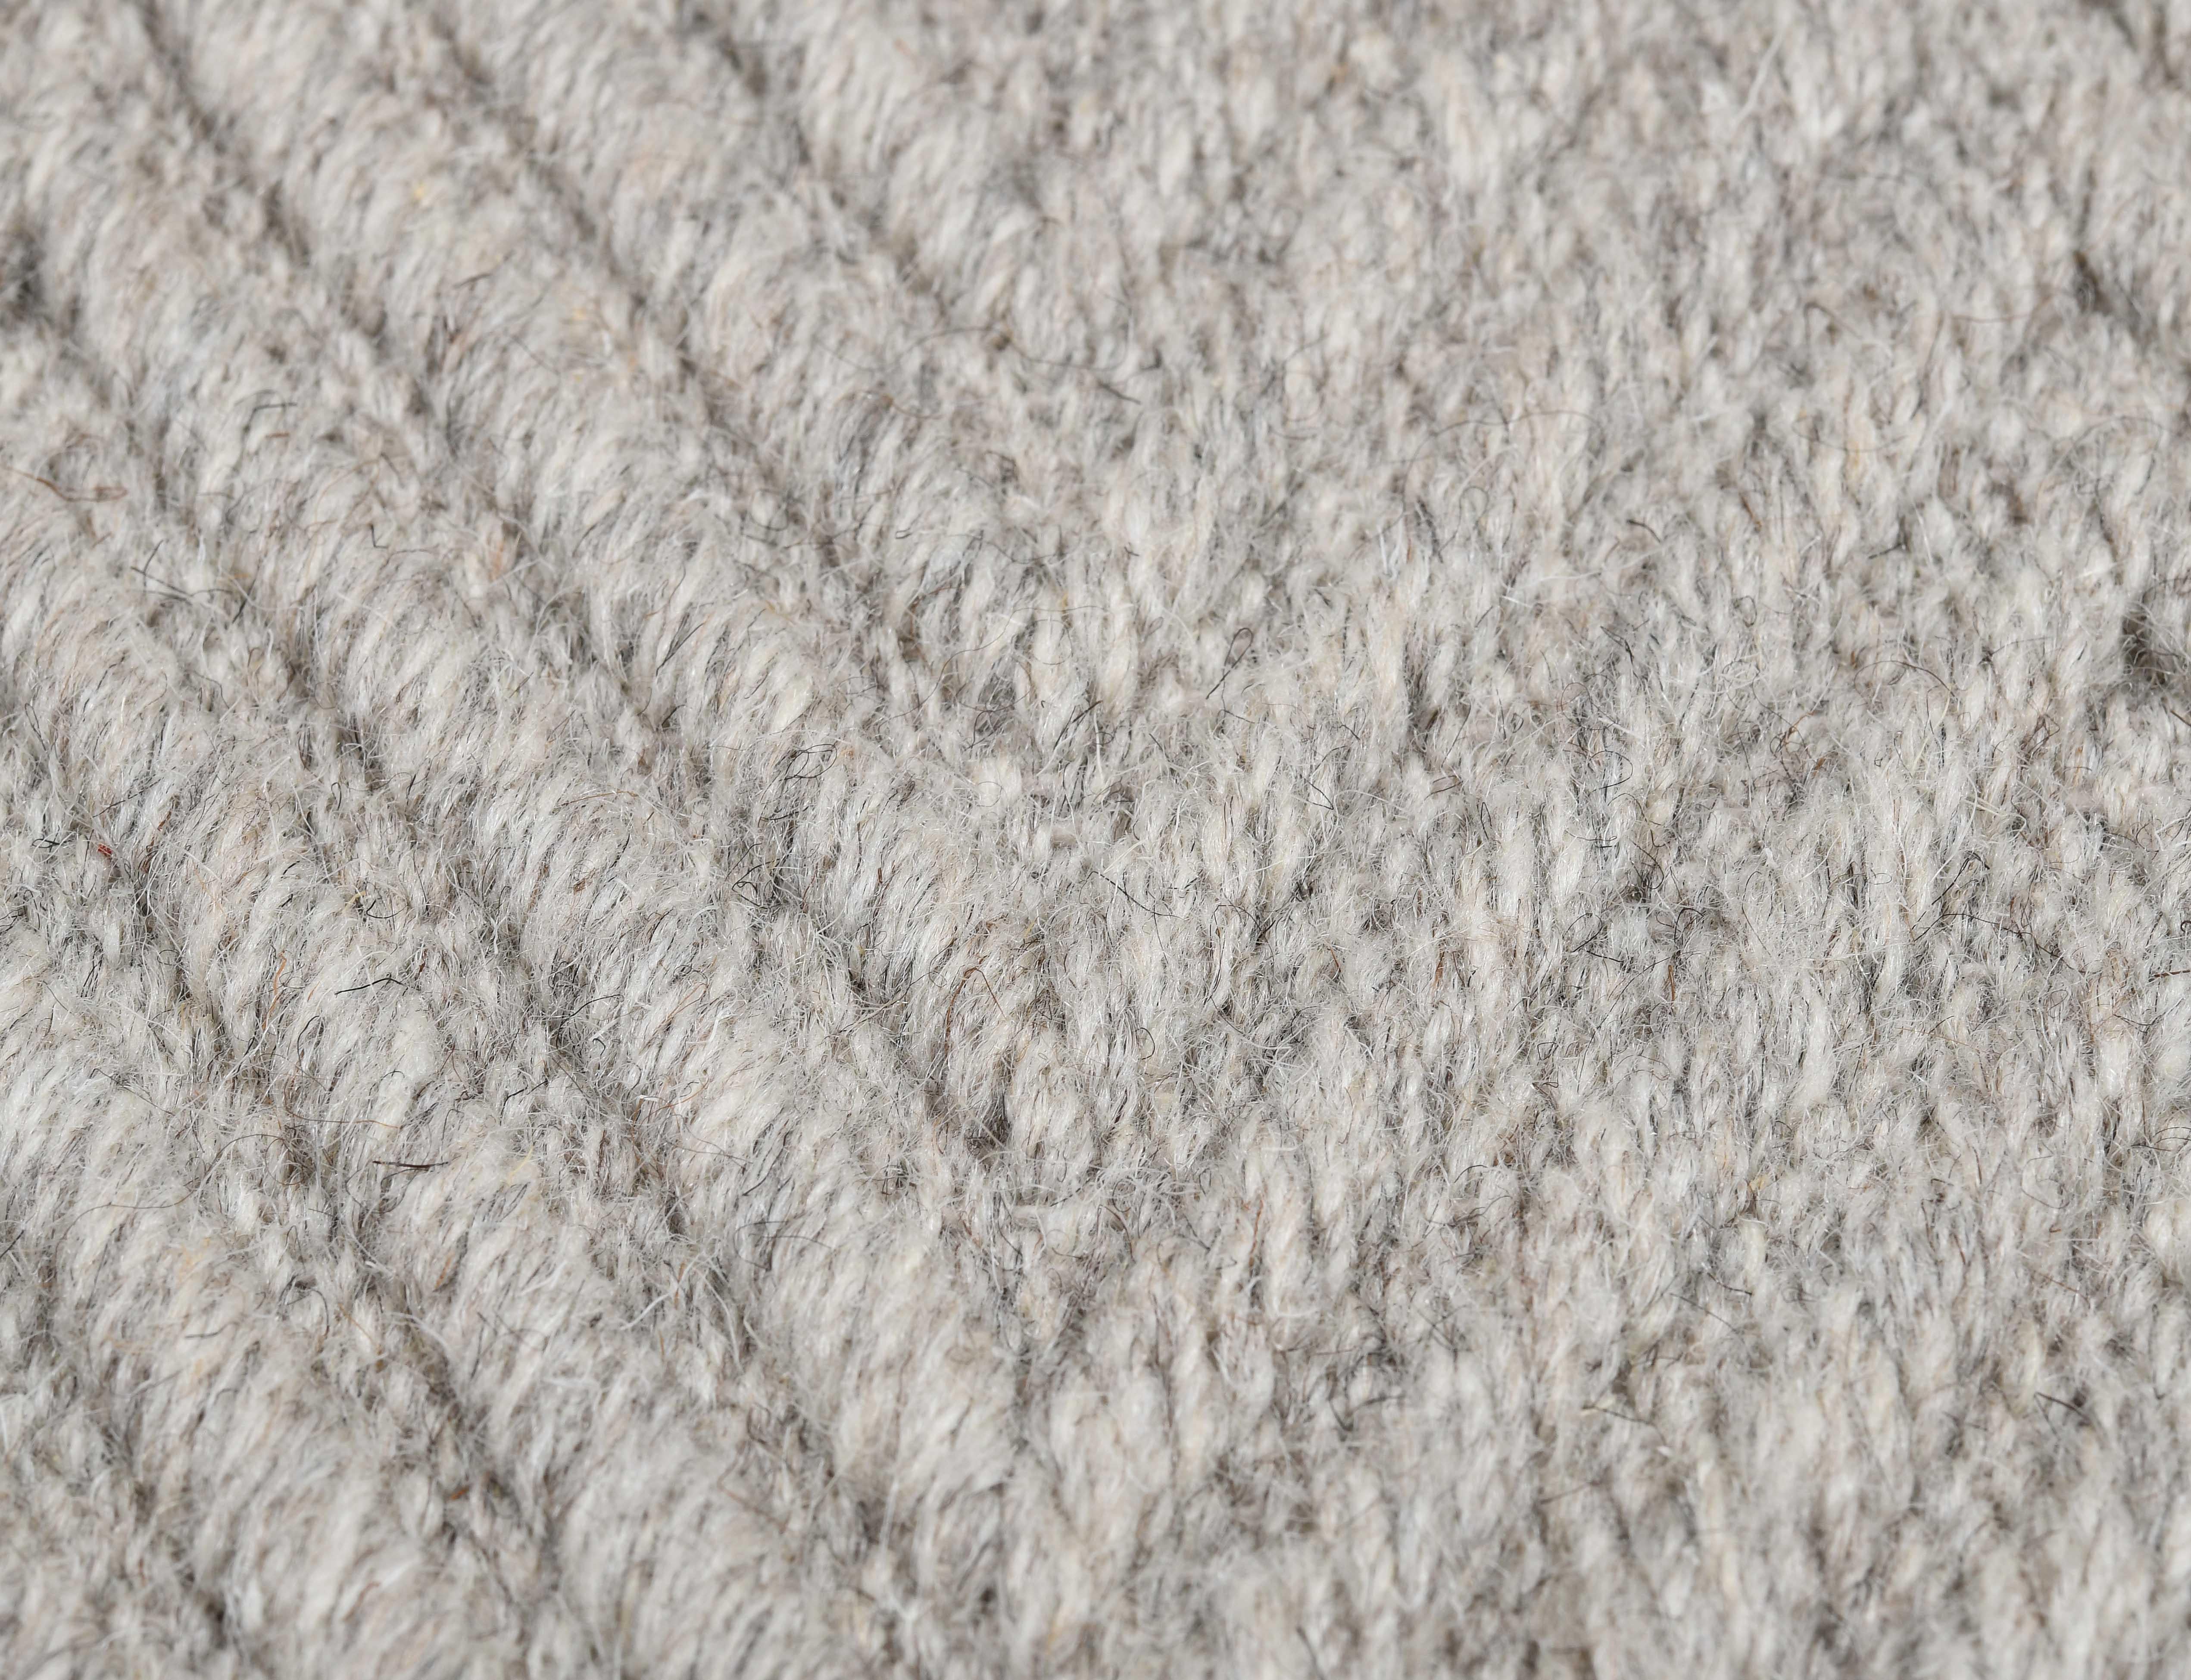 Indian Lanx, Grey, Handwoven Face 60% Undyed NZ Wool, 40% Undyed MED Wool, 8' x 10' For Sale